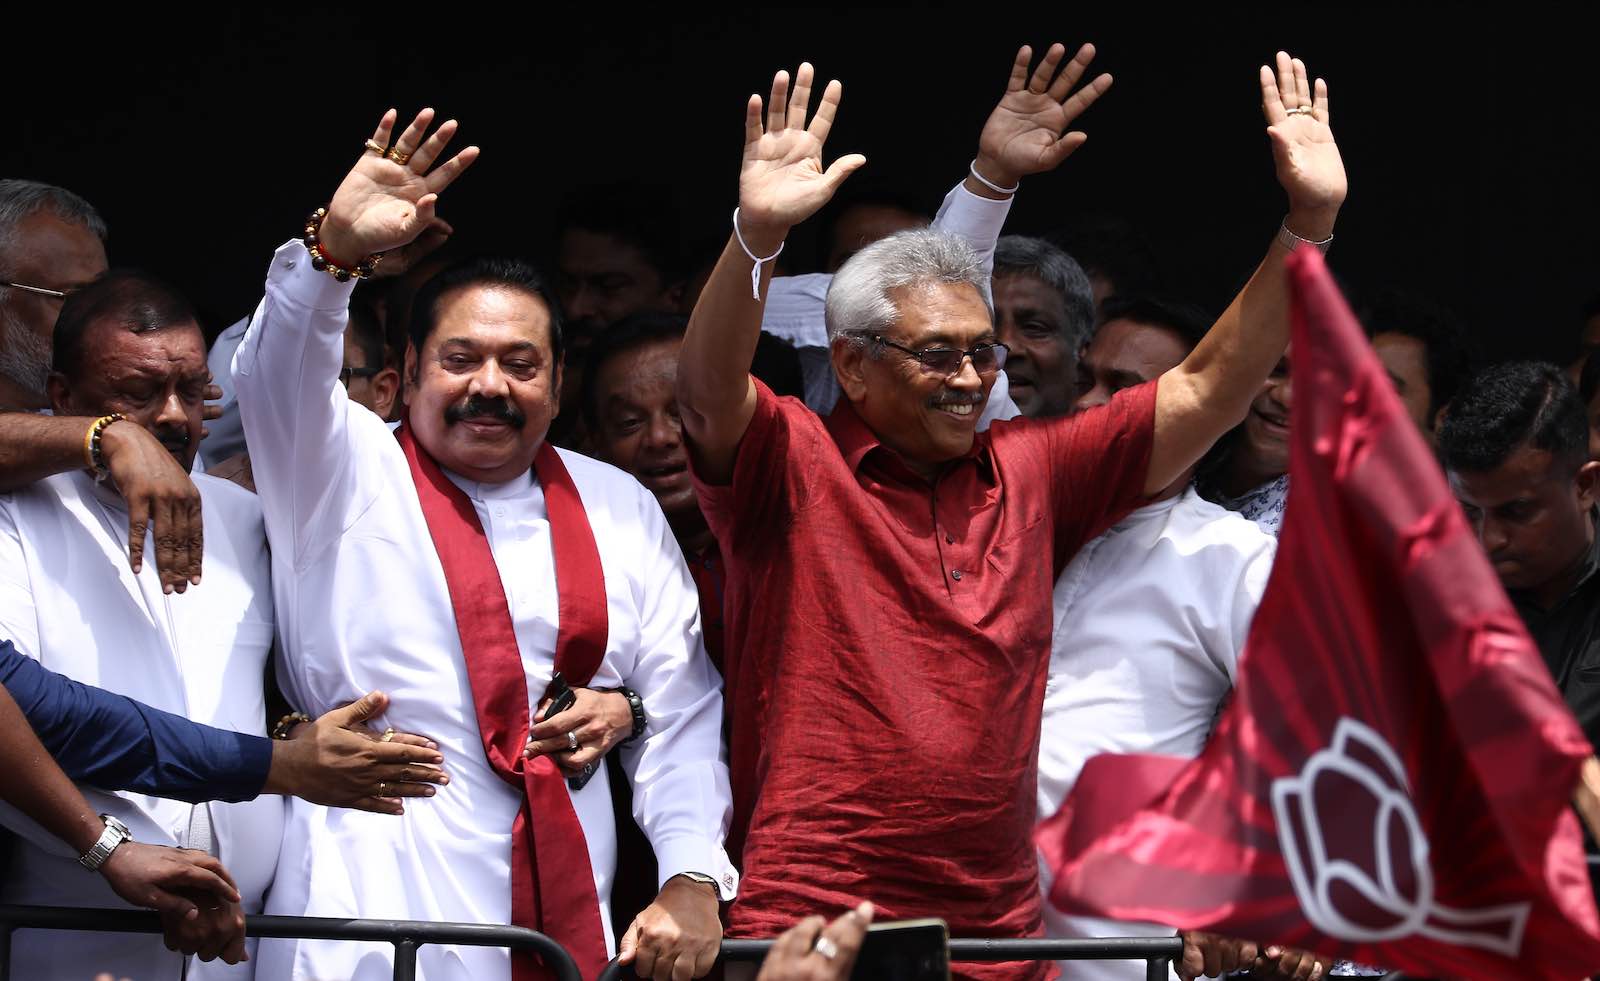 Sri Lankan presidential candidate Gotabaya Rajapaksa (wearing a Red shirt) and his brother, former president Mahinda Rajapaksa (L) acknowledge their supporters after submitting nominations for the upcoming presidential election on Monday 7 October 2019.  (Photo by Tharaka Basnayaka/NurPhoto via Getty Images)